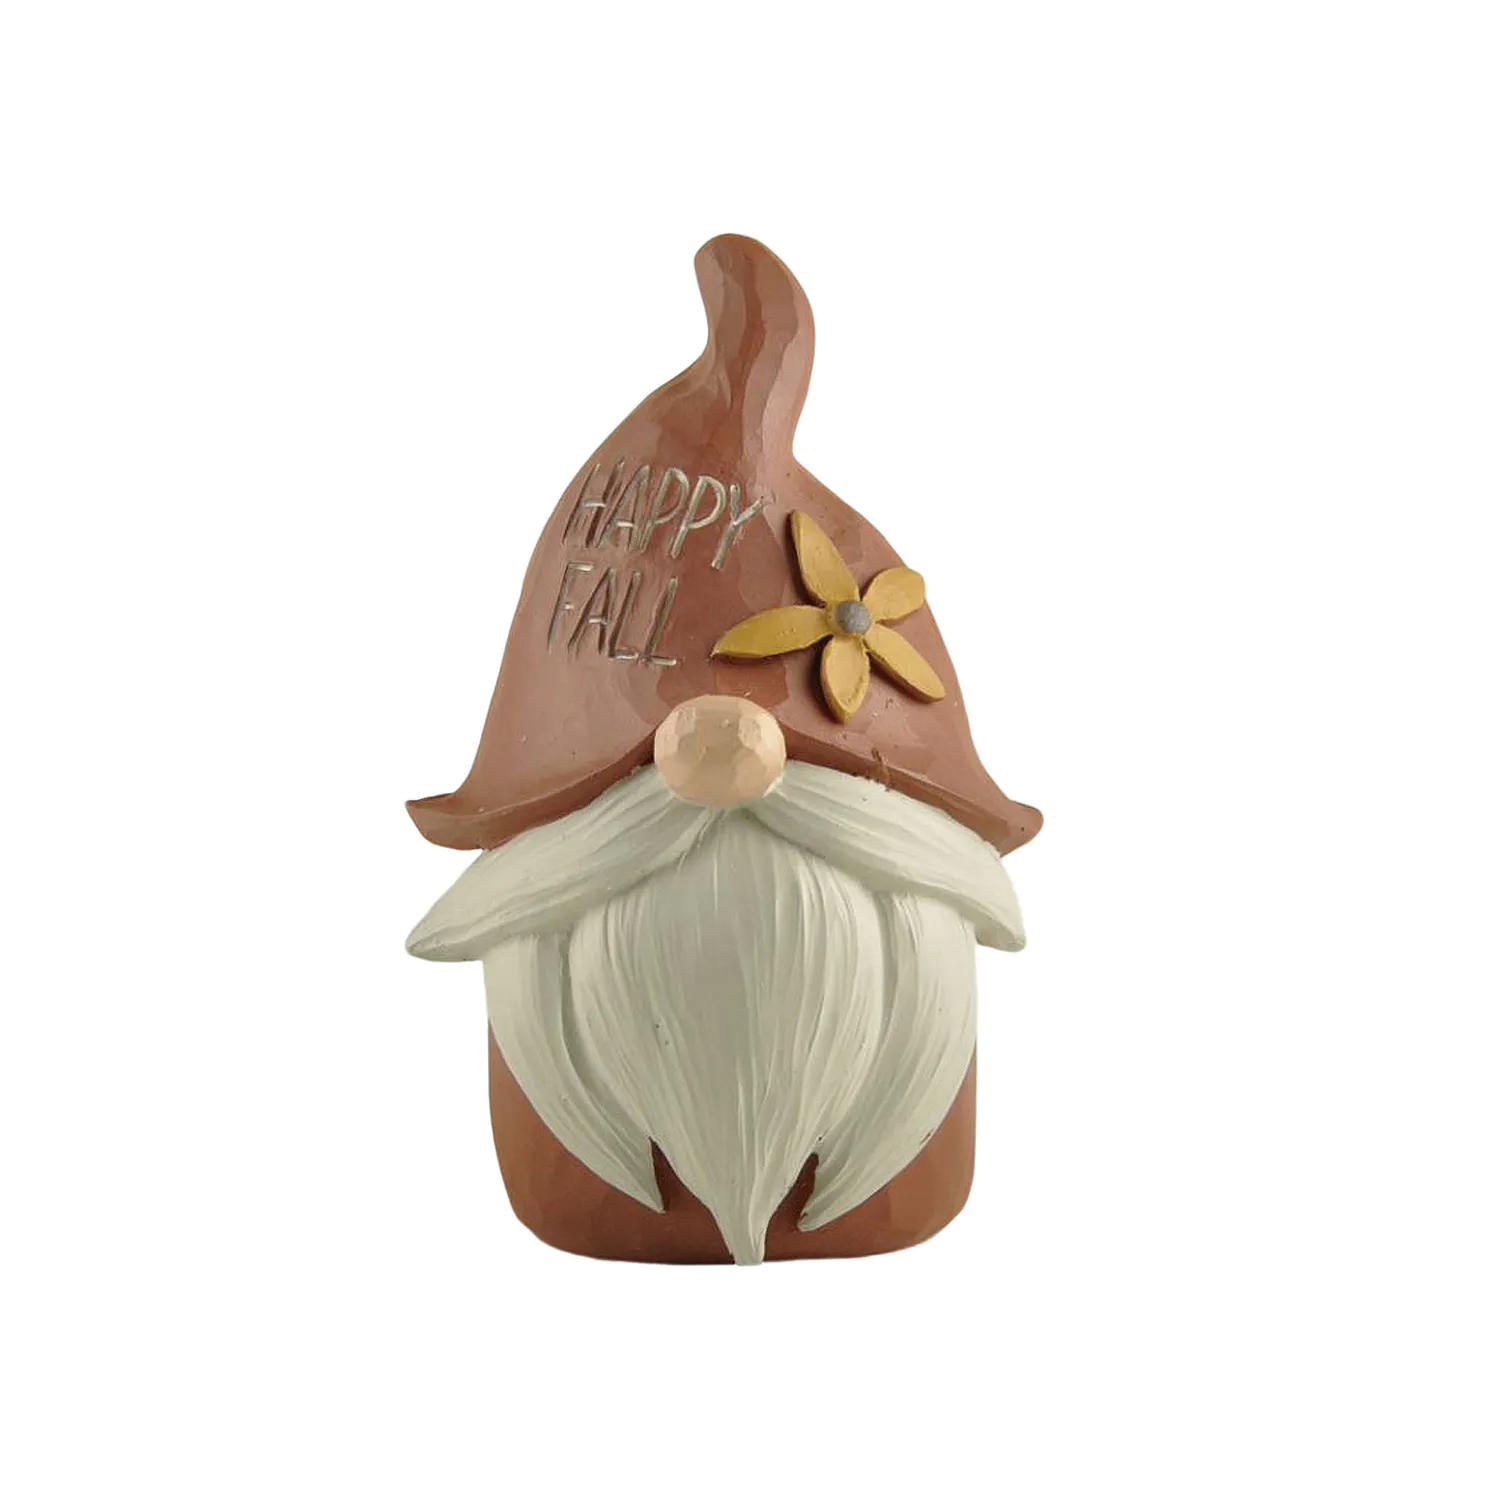 Autumn New 4-inch Hot-selling Resin Crafts Gnome-HAPPY FALL For Home Decoration236-13693